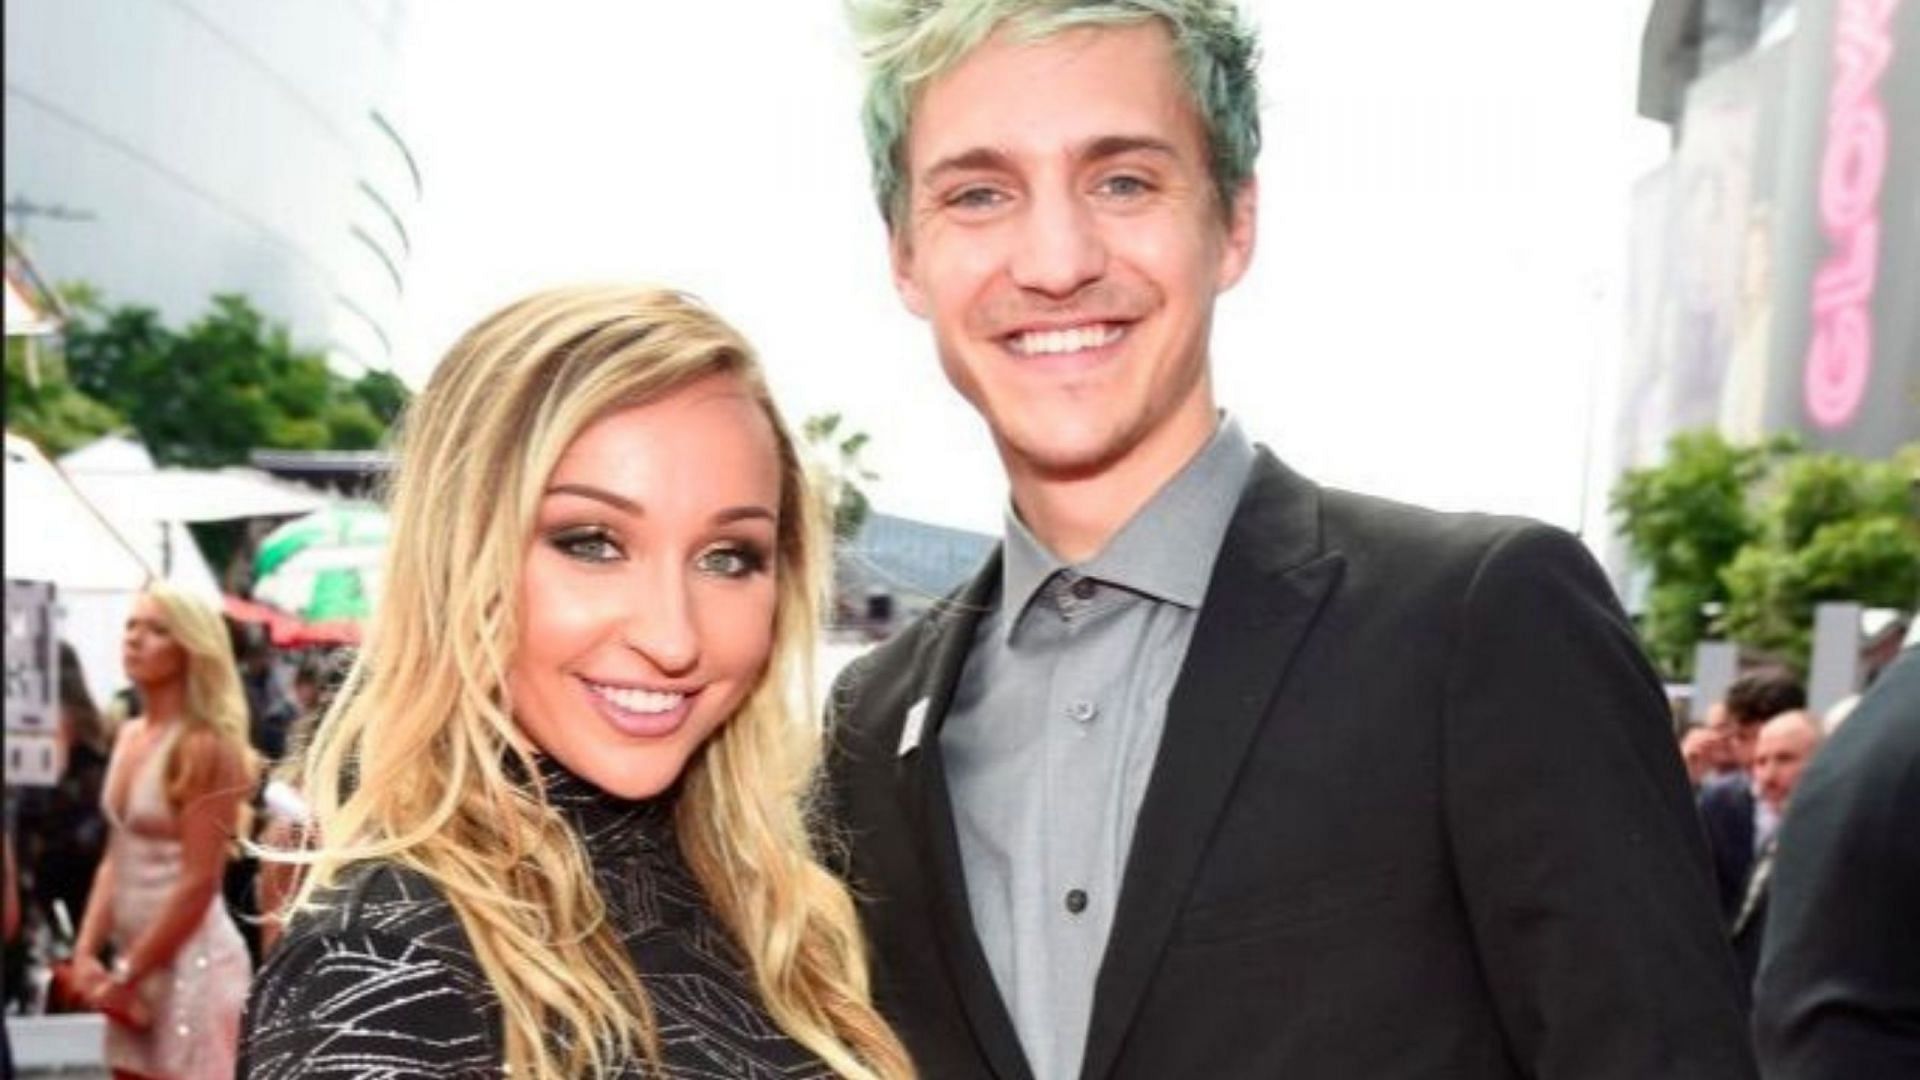 Jessica Blevins to step down as Ninja&#039;s manager (Image via Kevin Mazur on Getty Images)